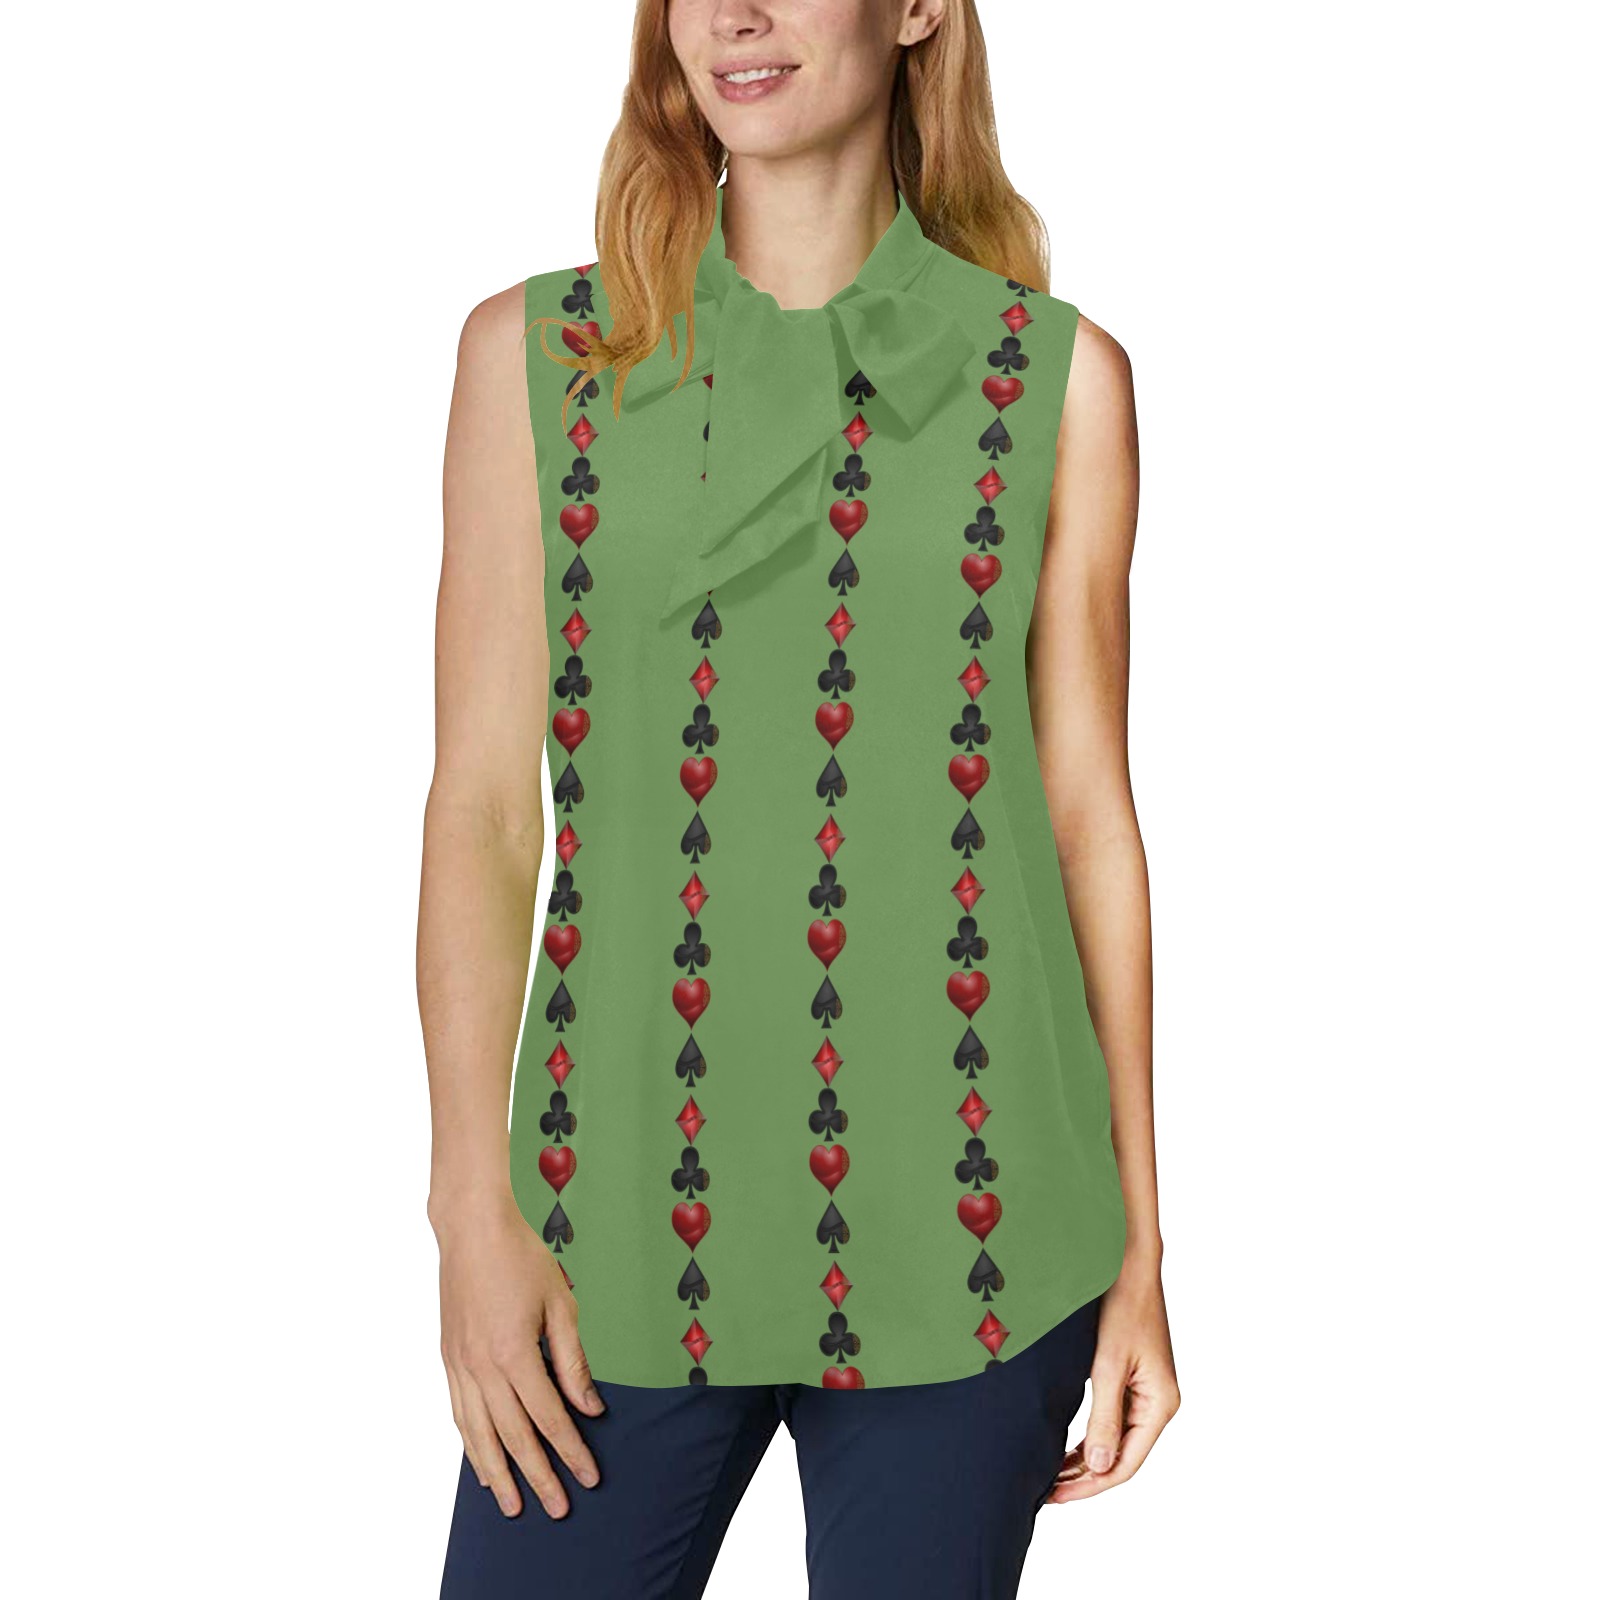 Black Red Playing Card Shapes - Green Women's Bow Tie V-Neck Sleeveless Shirt (Model T69)